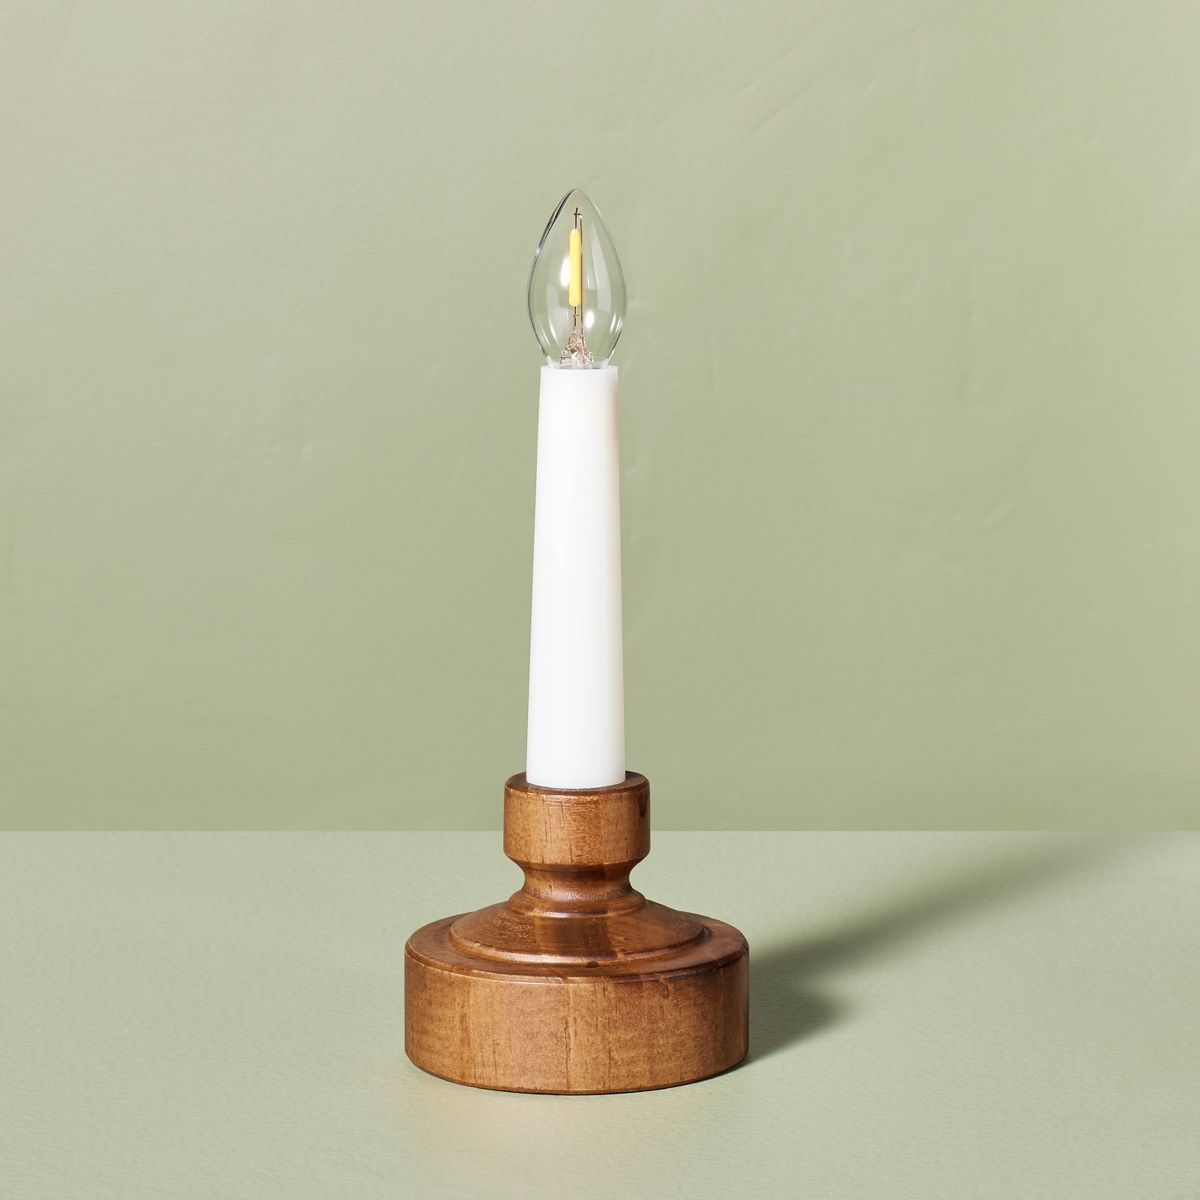 7"x3" Flameless Christmas Window Candle with Wood Base - Hearth & Hand™ with Magnolia | Target